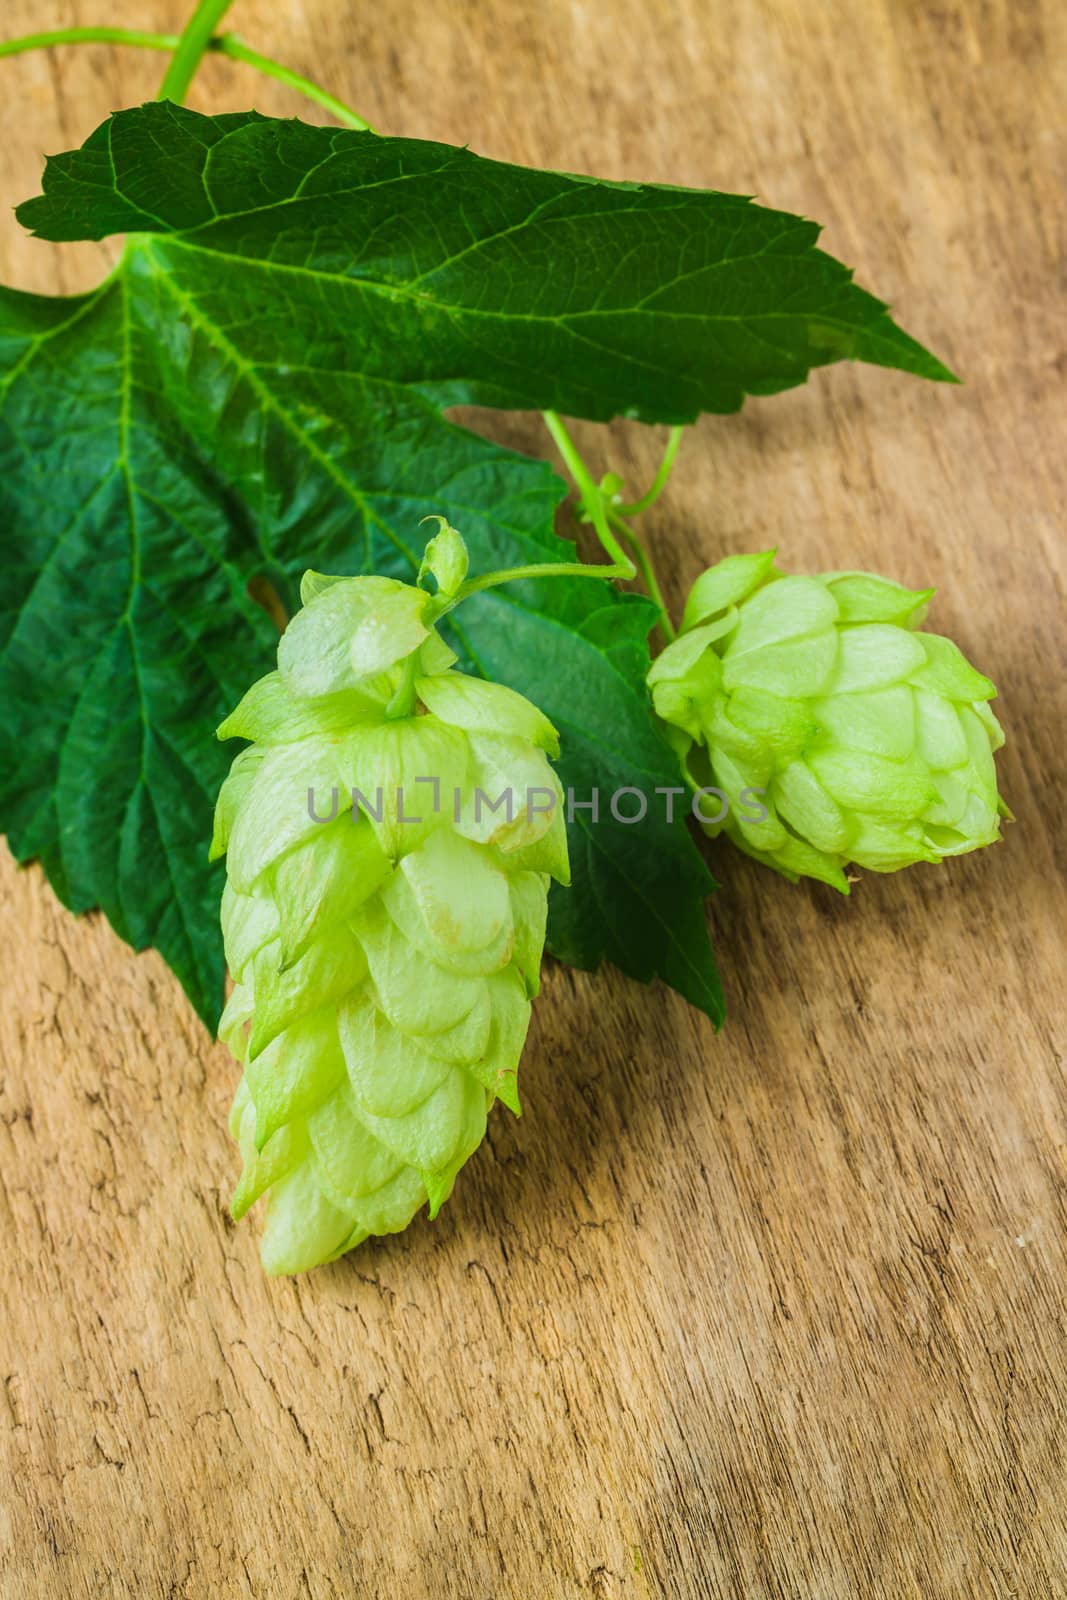 Hops  background of the old board by oleg_zhukov